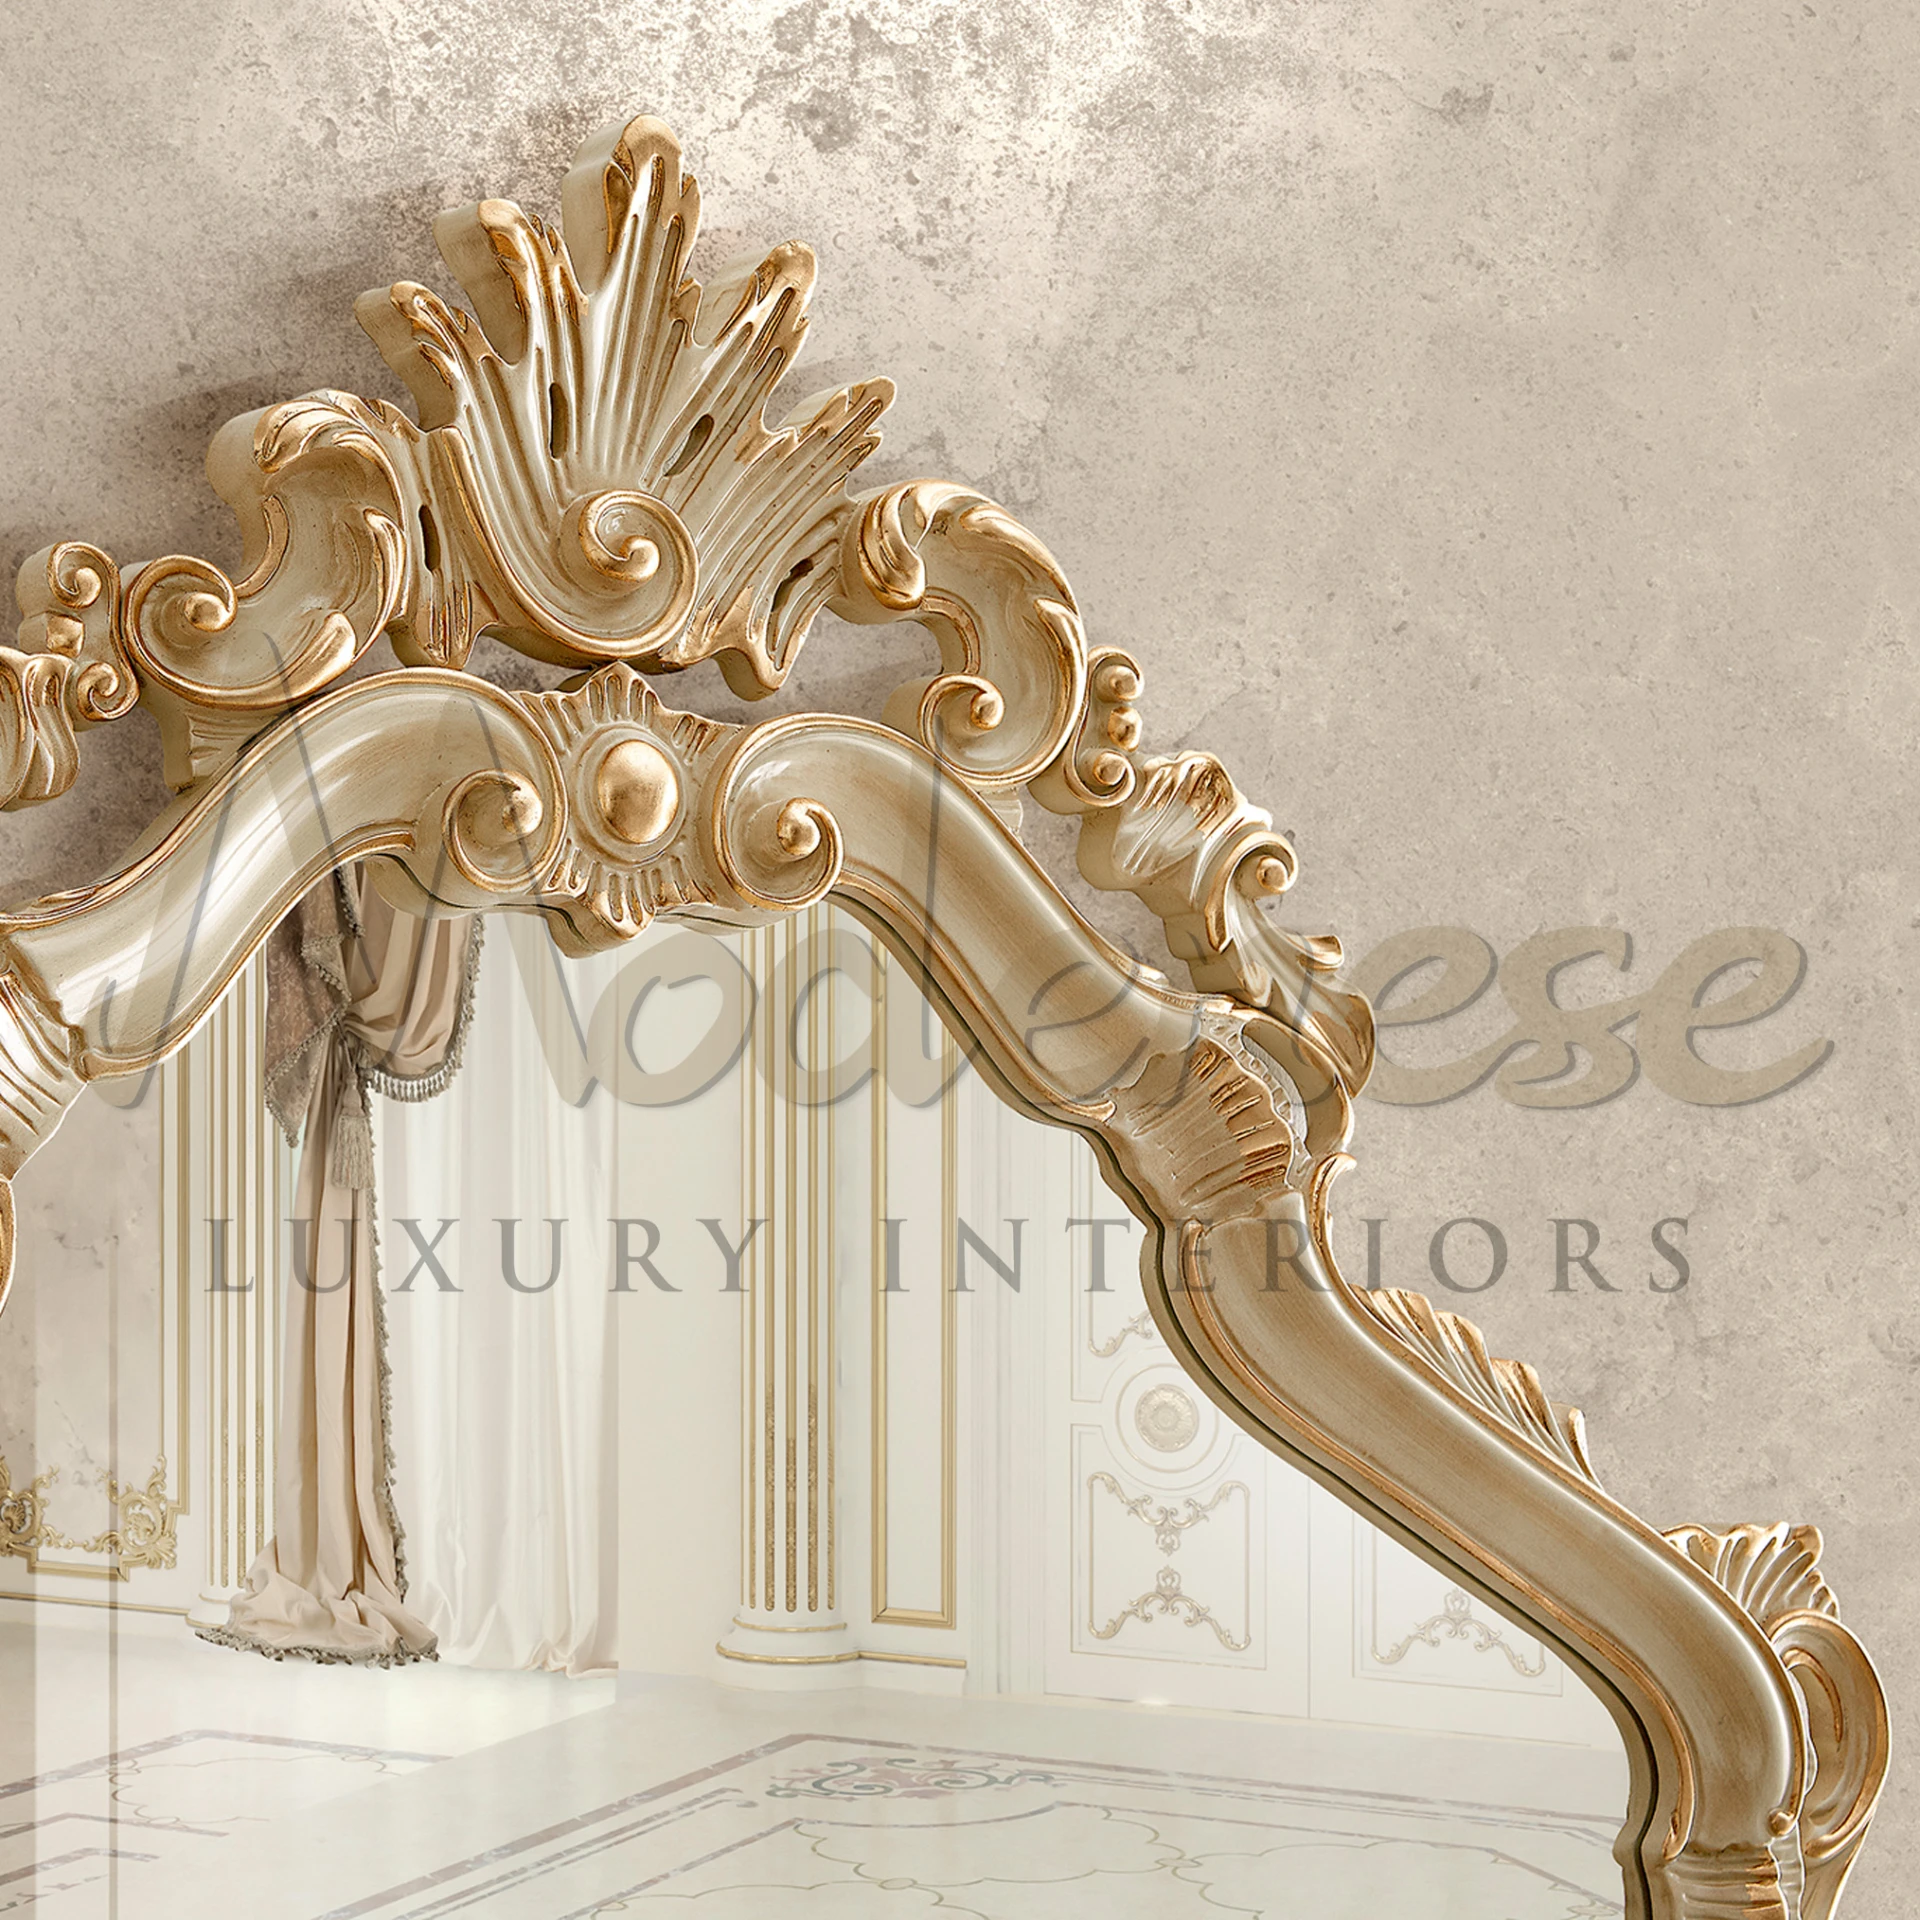 Noble and bespoke, this handcrafted Figured Mirror from Italy enhances any interior with its unique baroque and classic style.